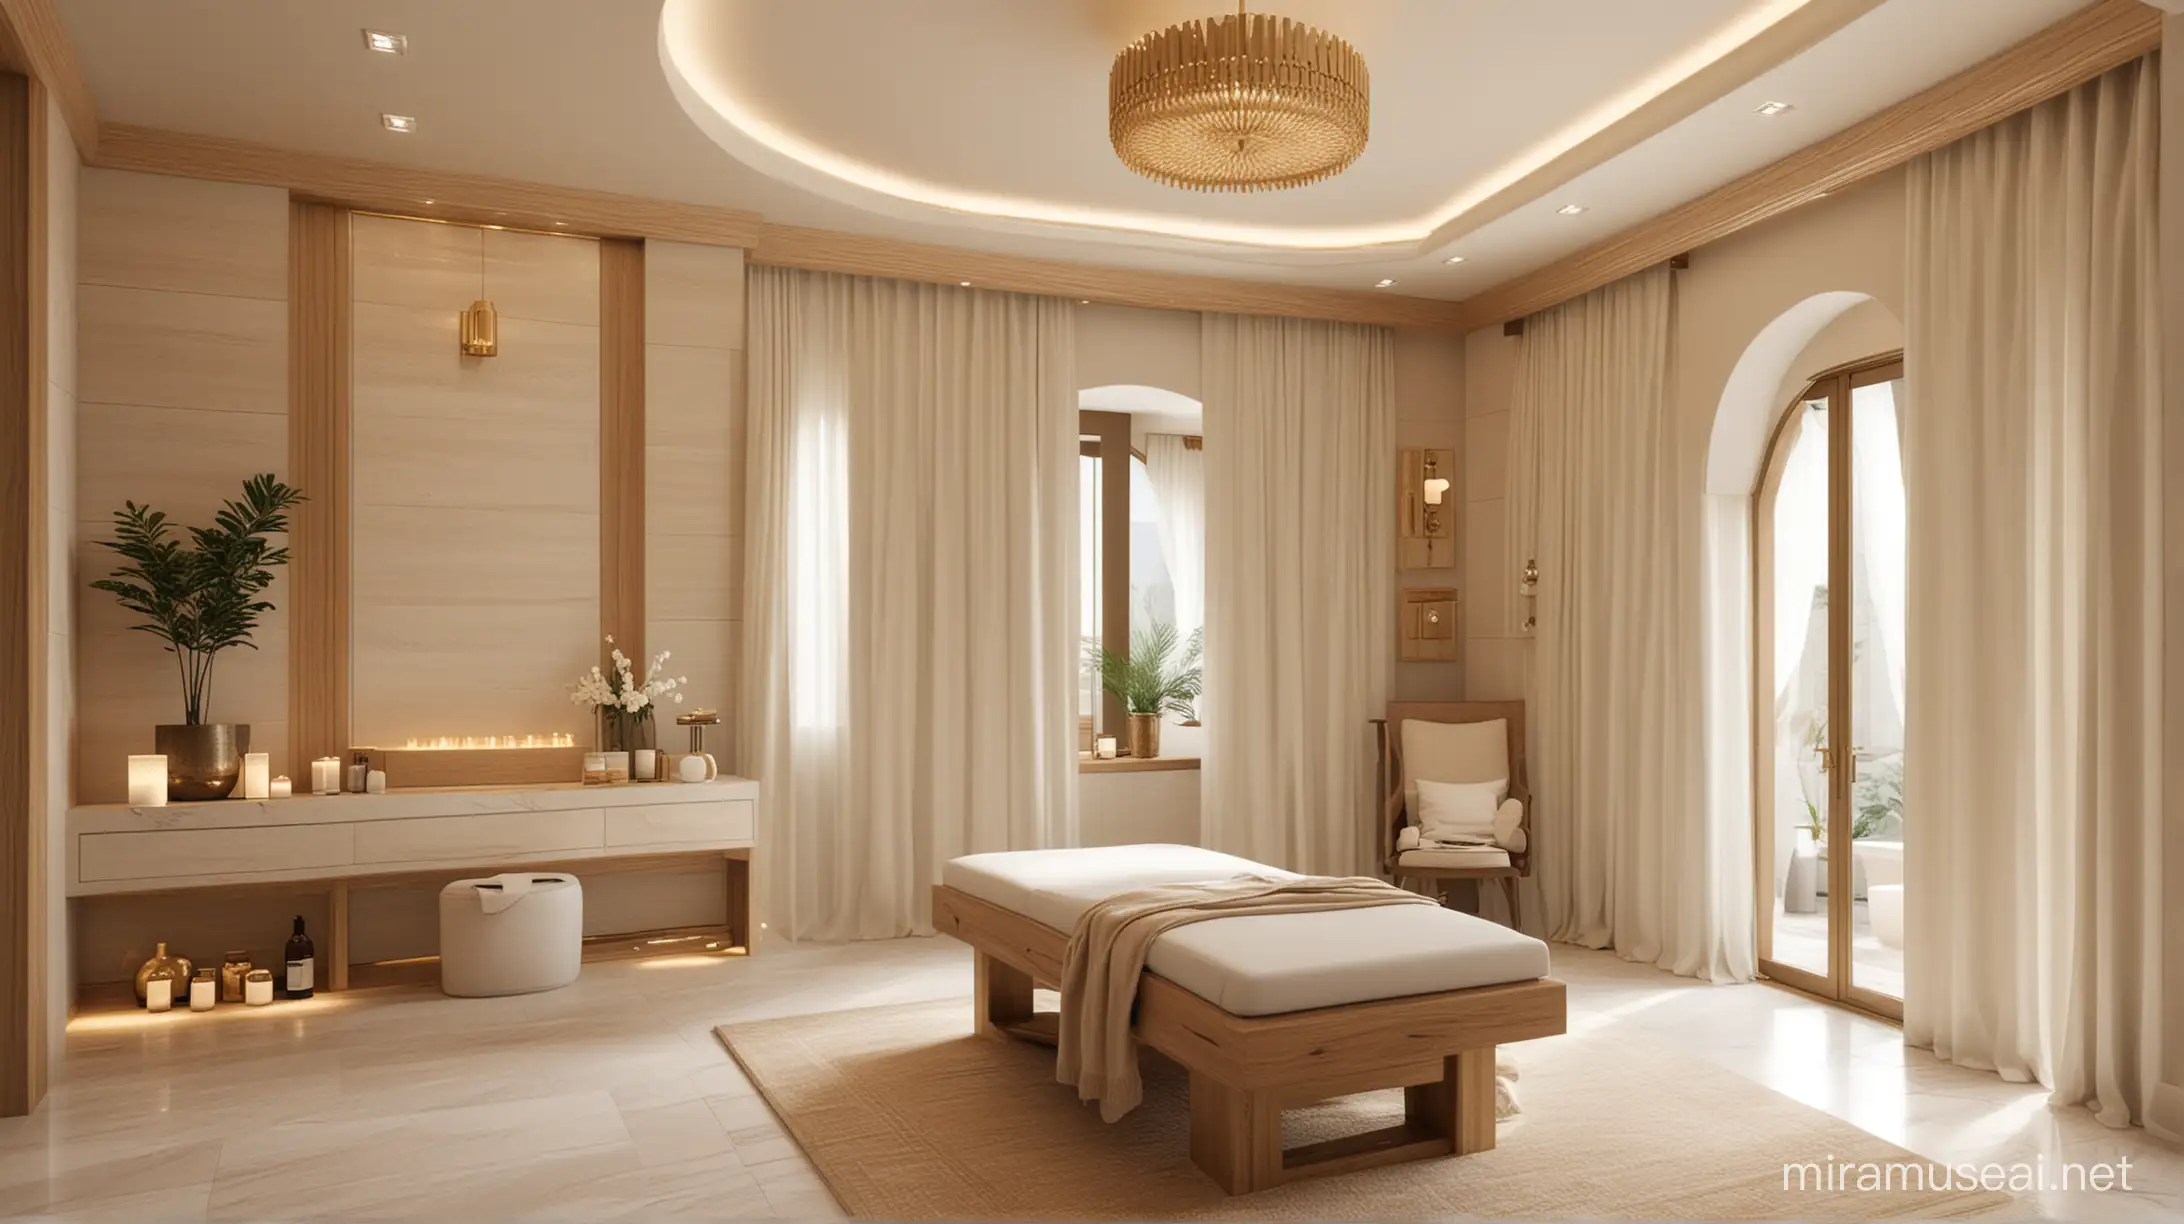 Luxurious Modern Master Spa Room with Massage Bench and Brass Accents